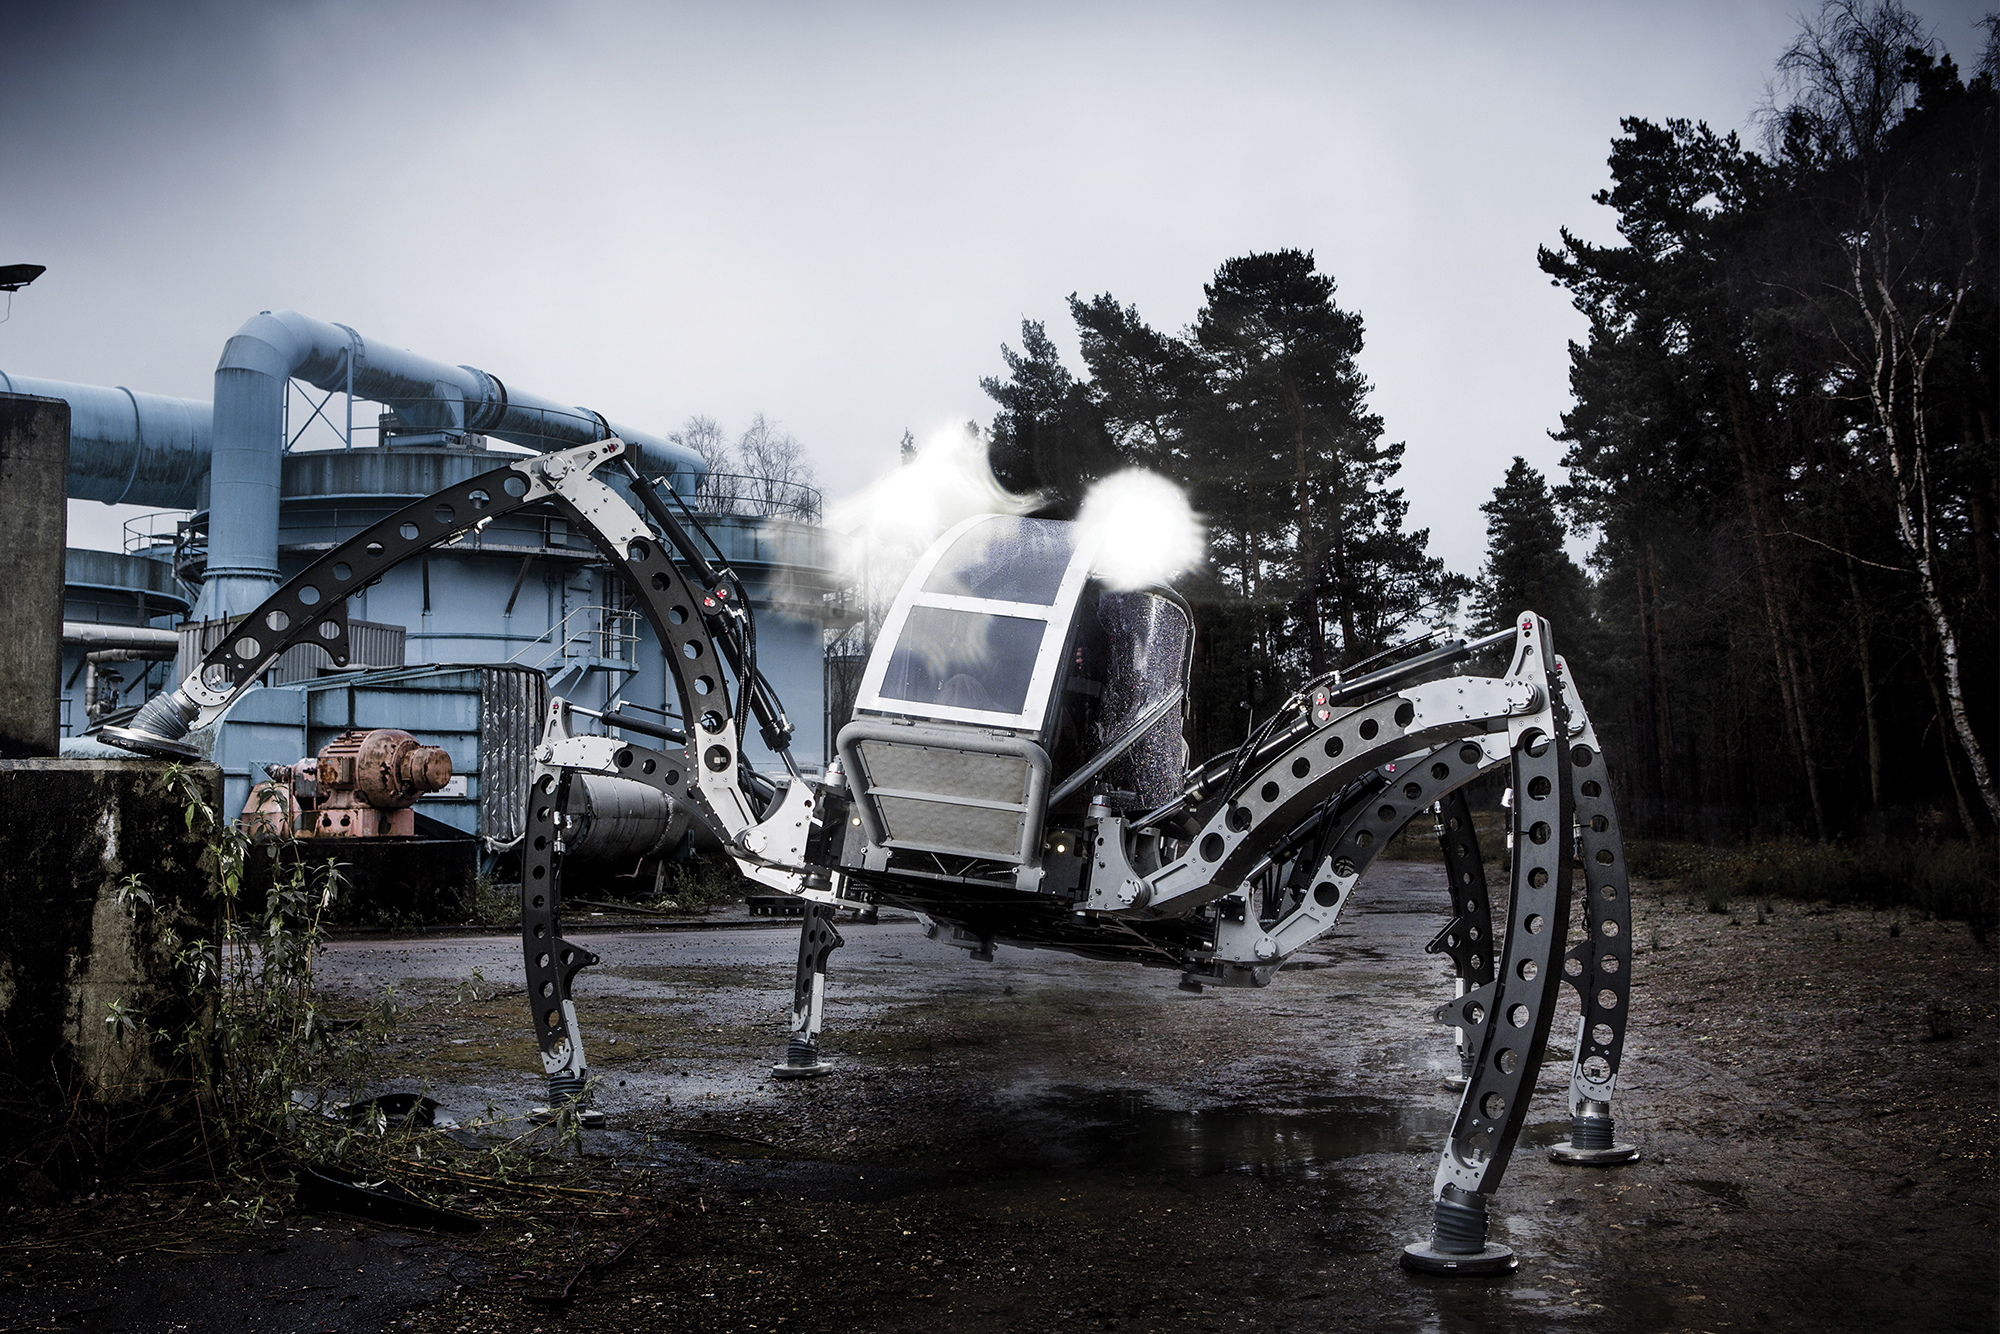 Ride This: An SUV-Size Insectoid Robot